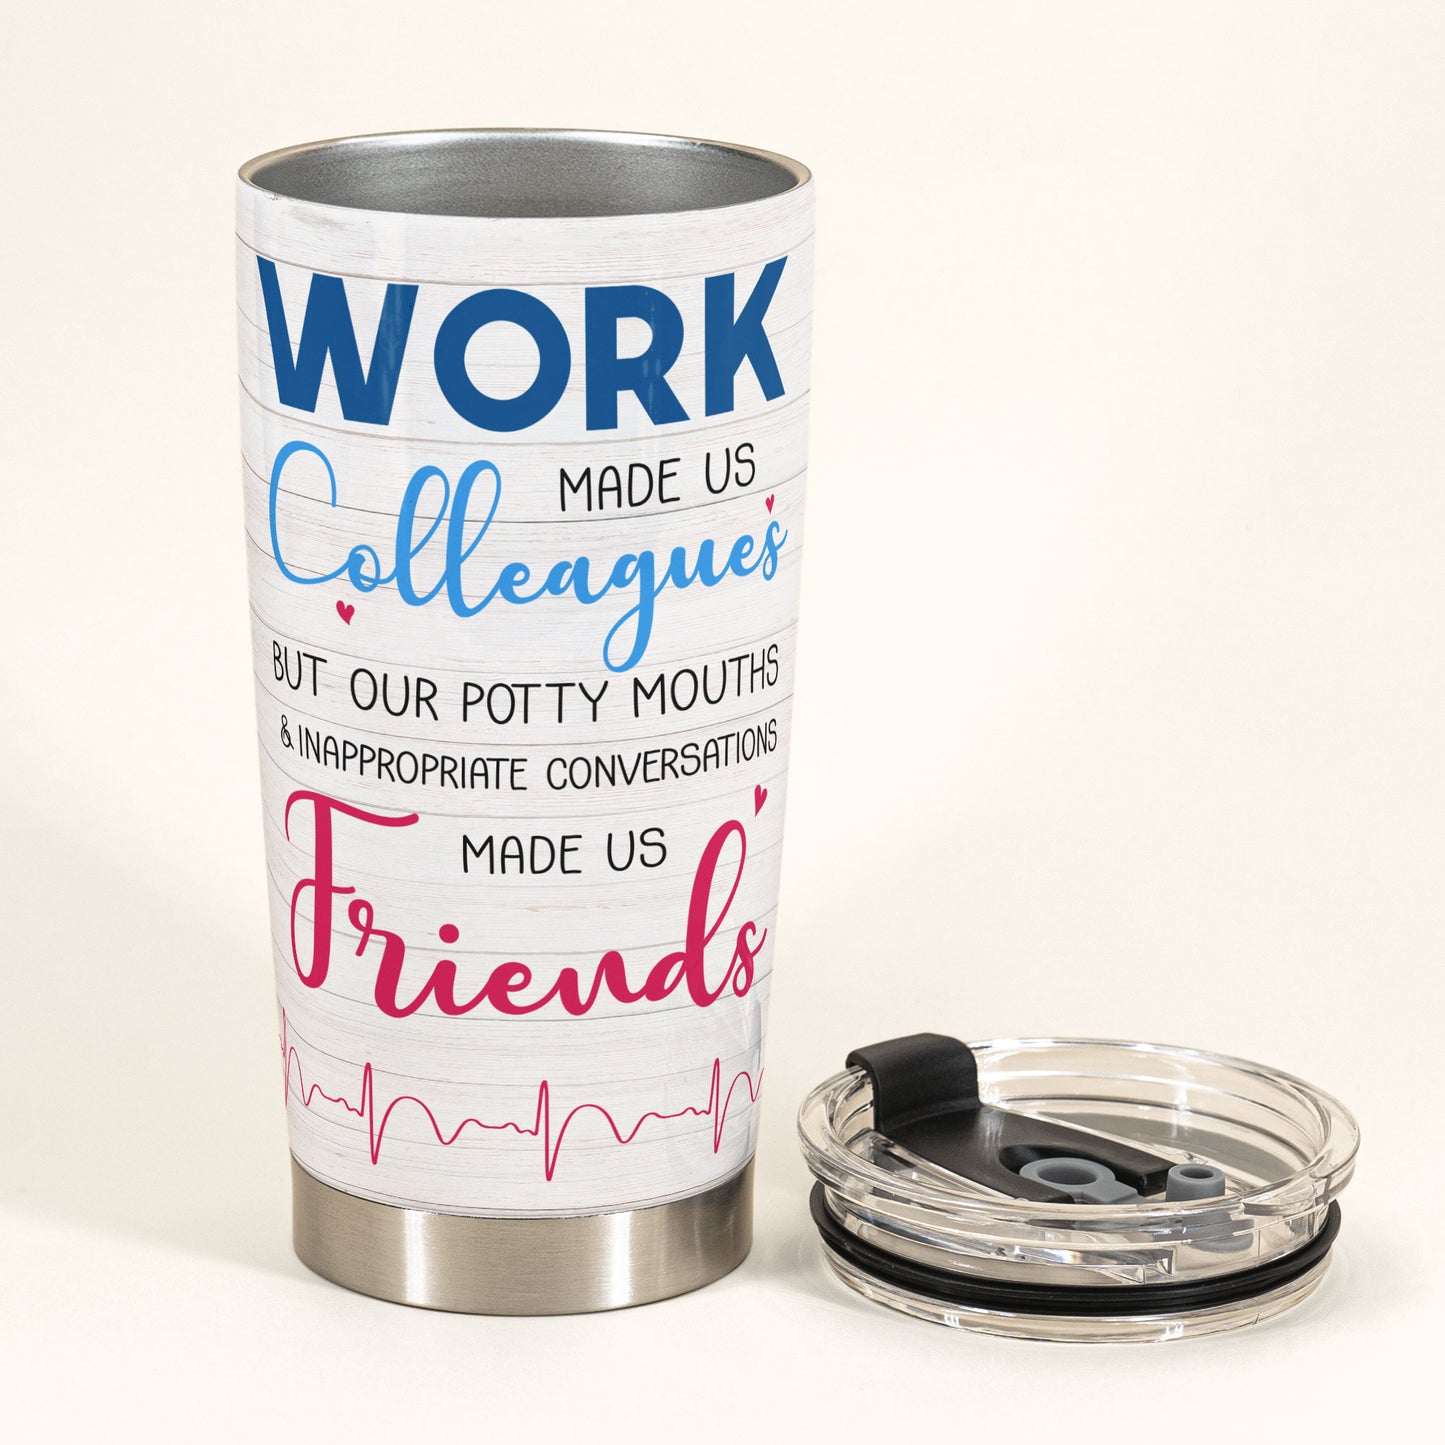 Work Made Us Colleagues - Personalized Tumbler Cup - Birthday Gift For Nursing Colleagues - Cute Chibi Nurse